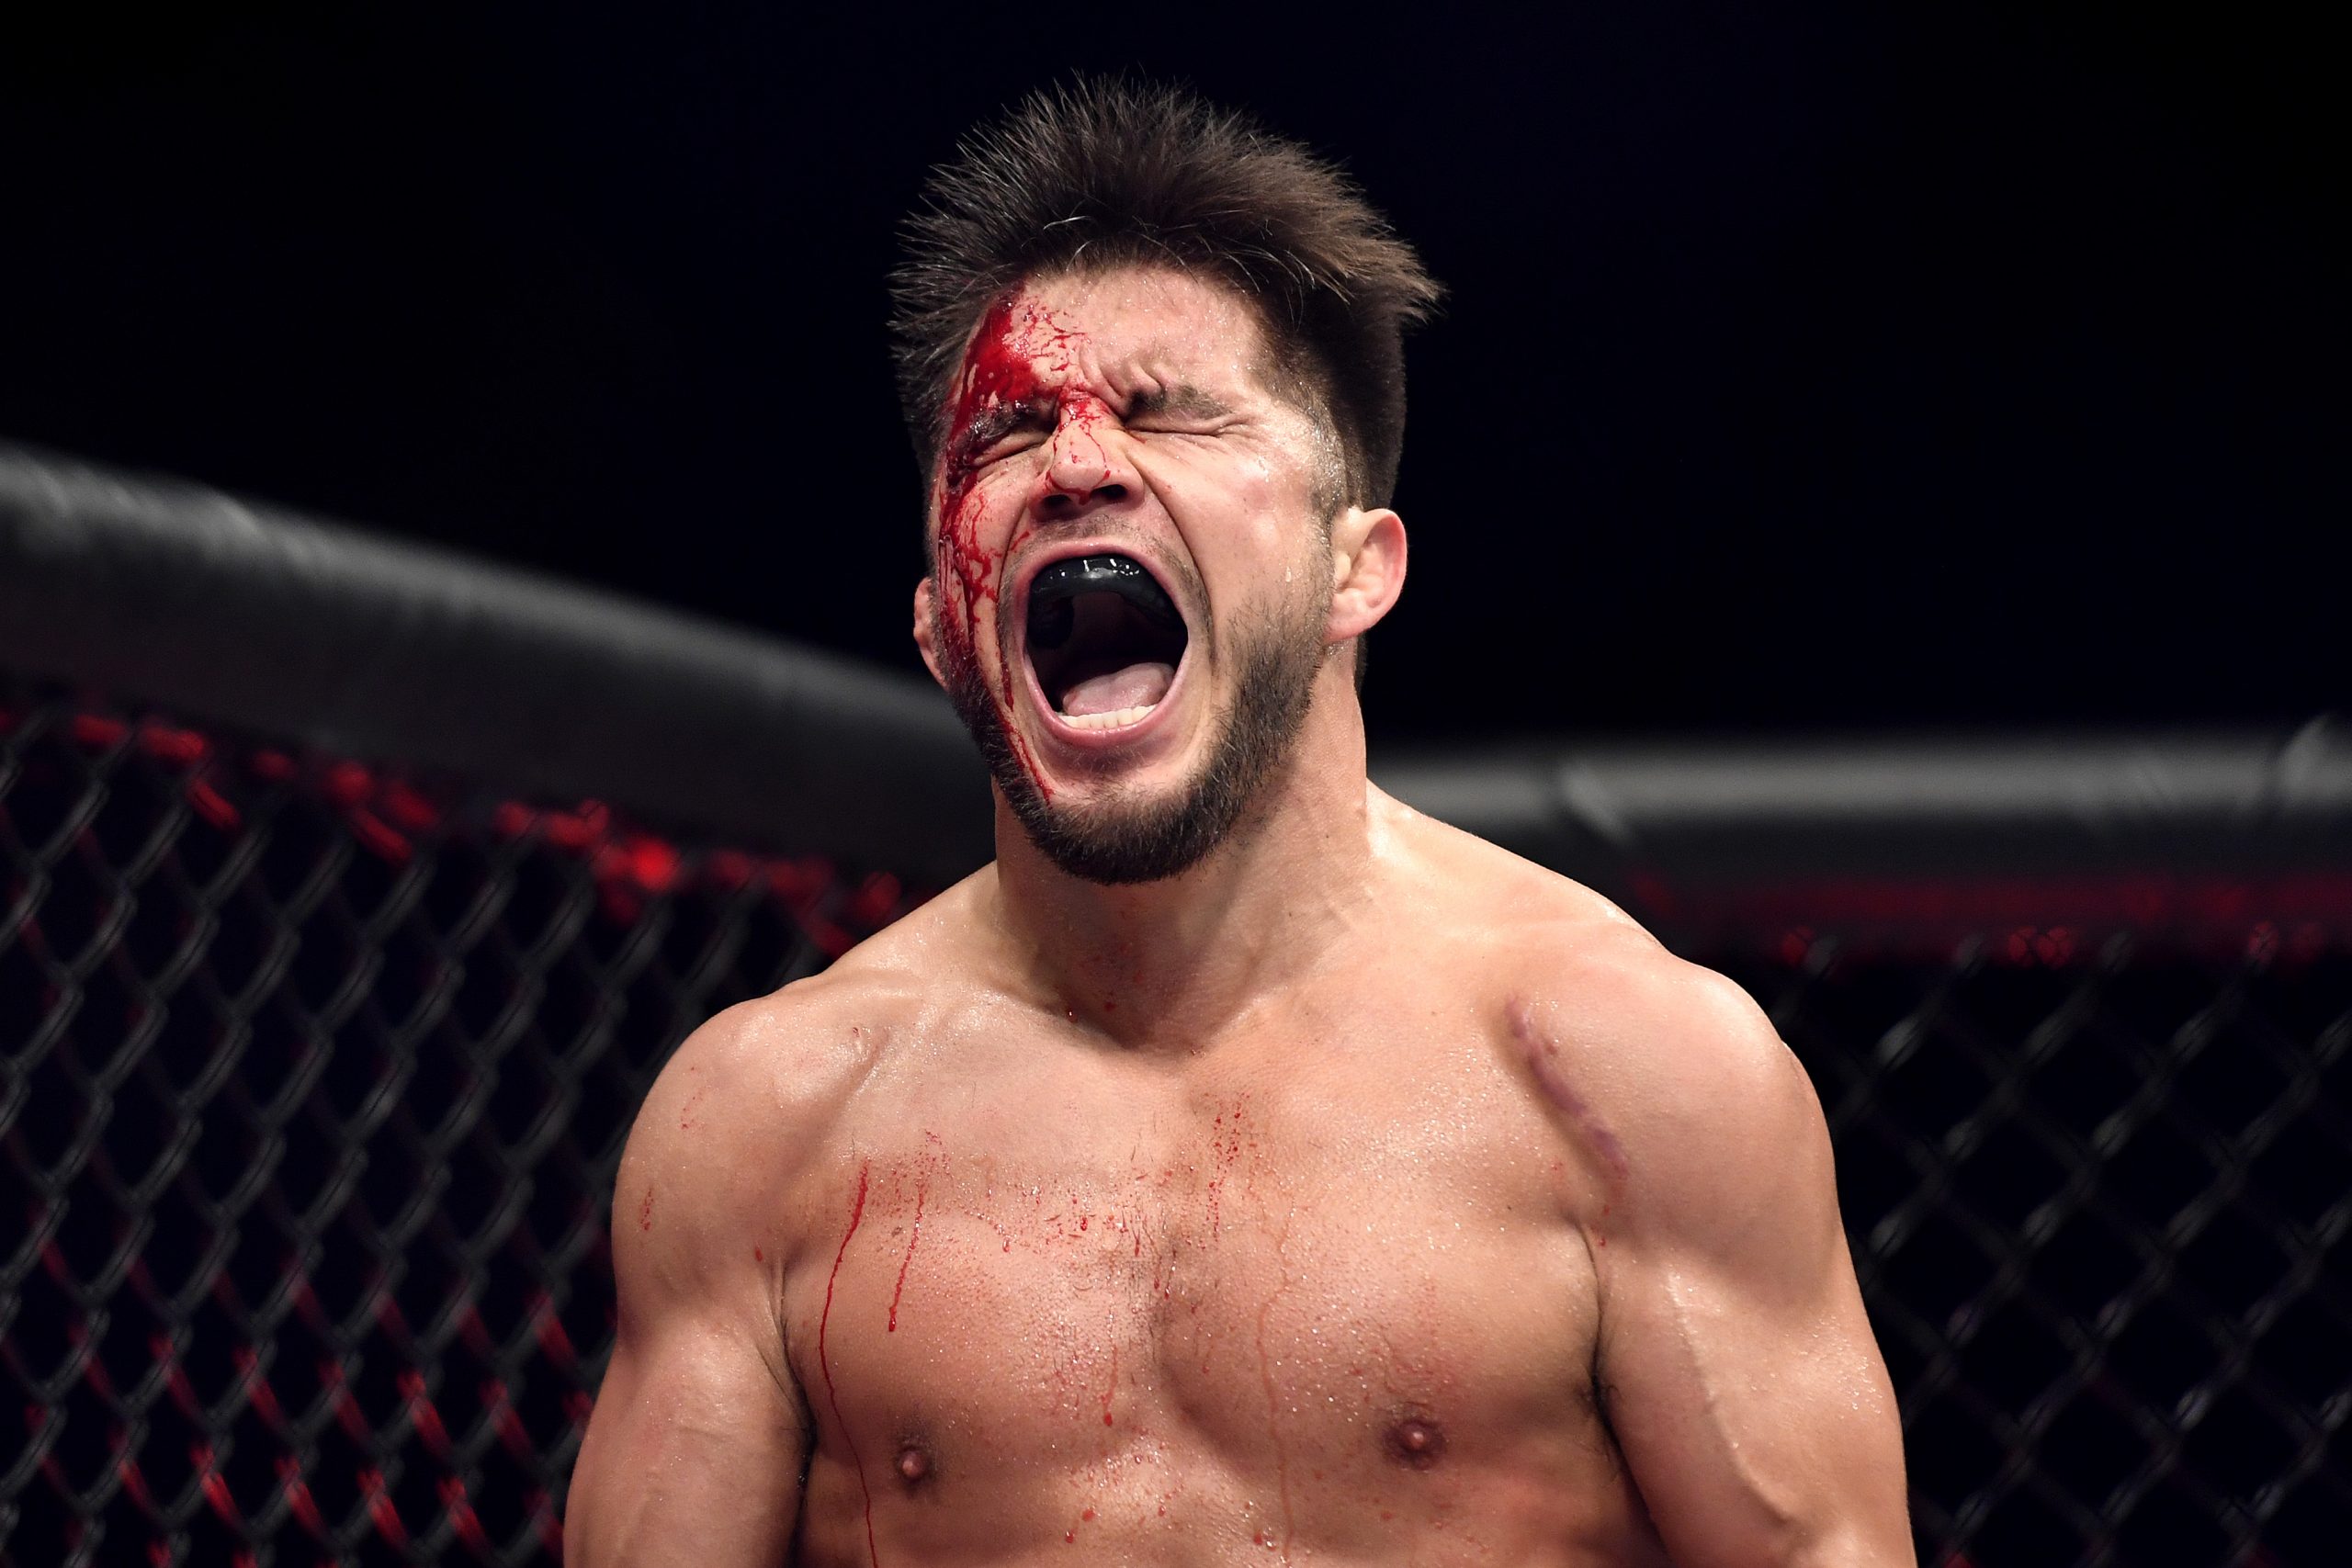 Henry Cejudo announced his retirement after defeating Dominick Cruz at UFC 249